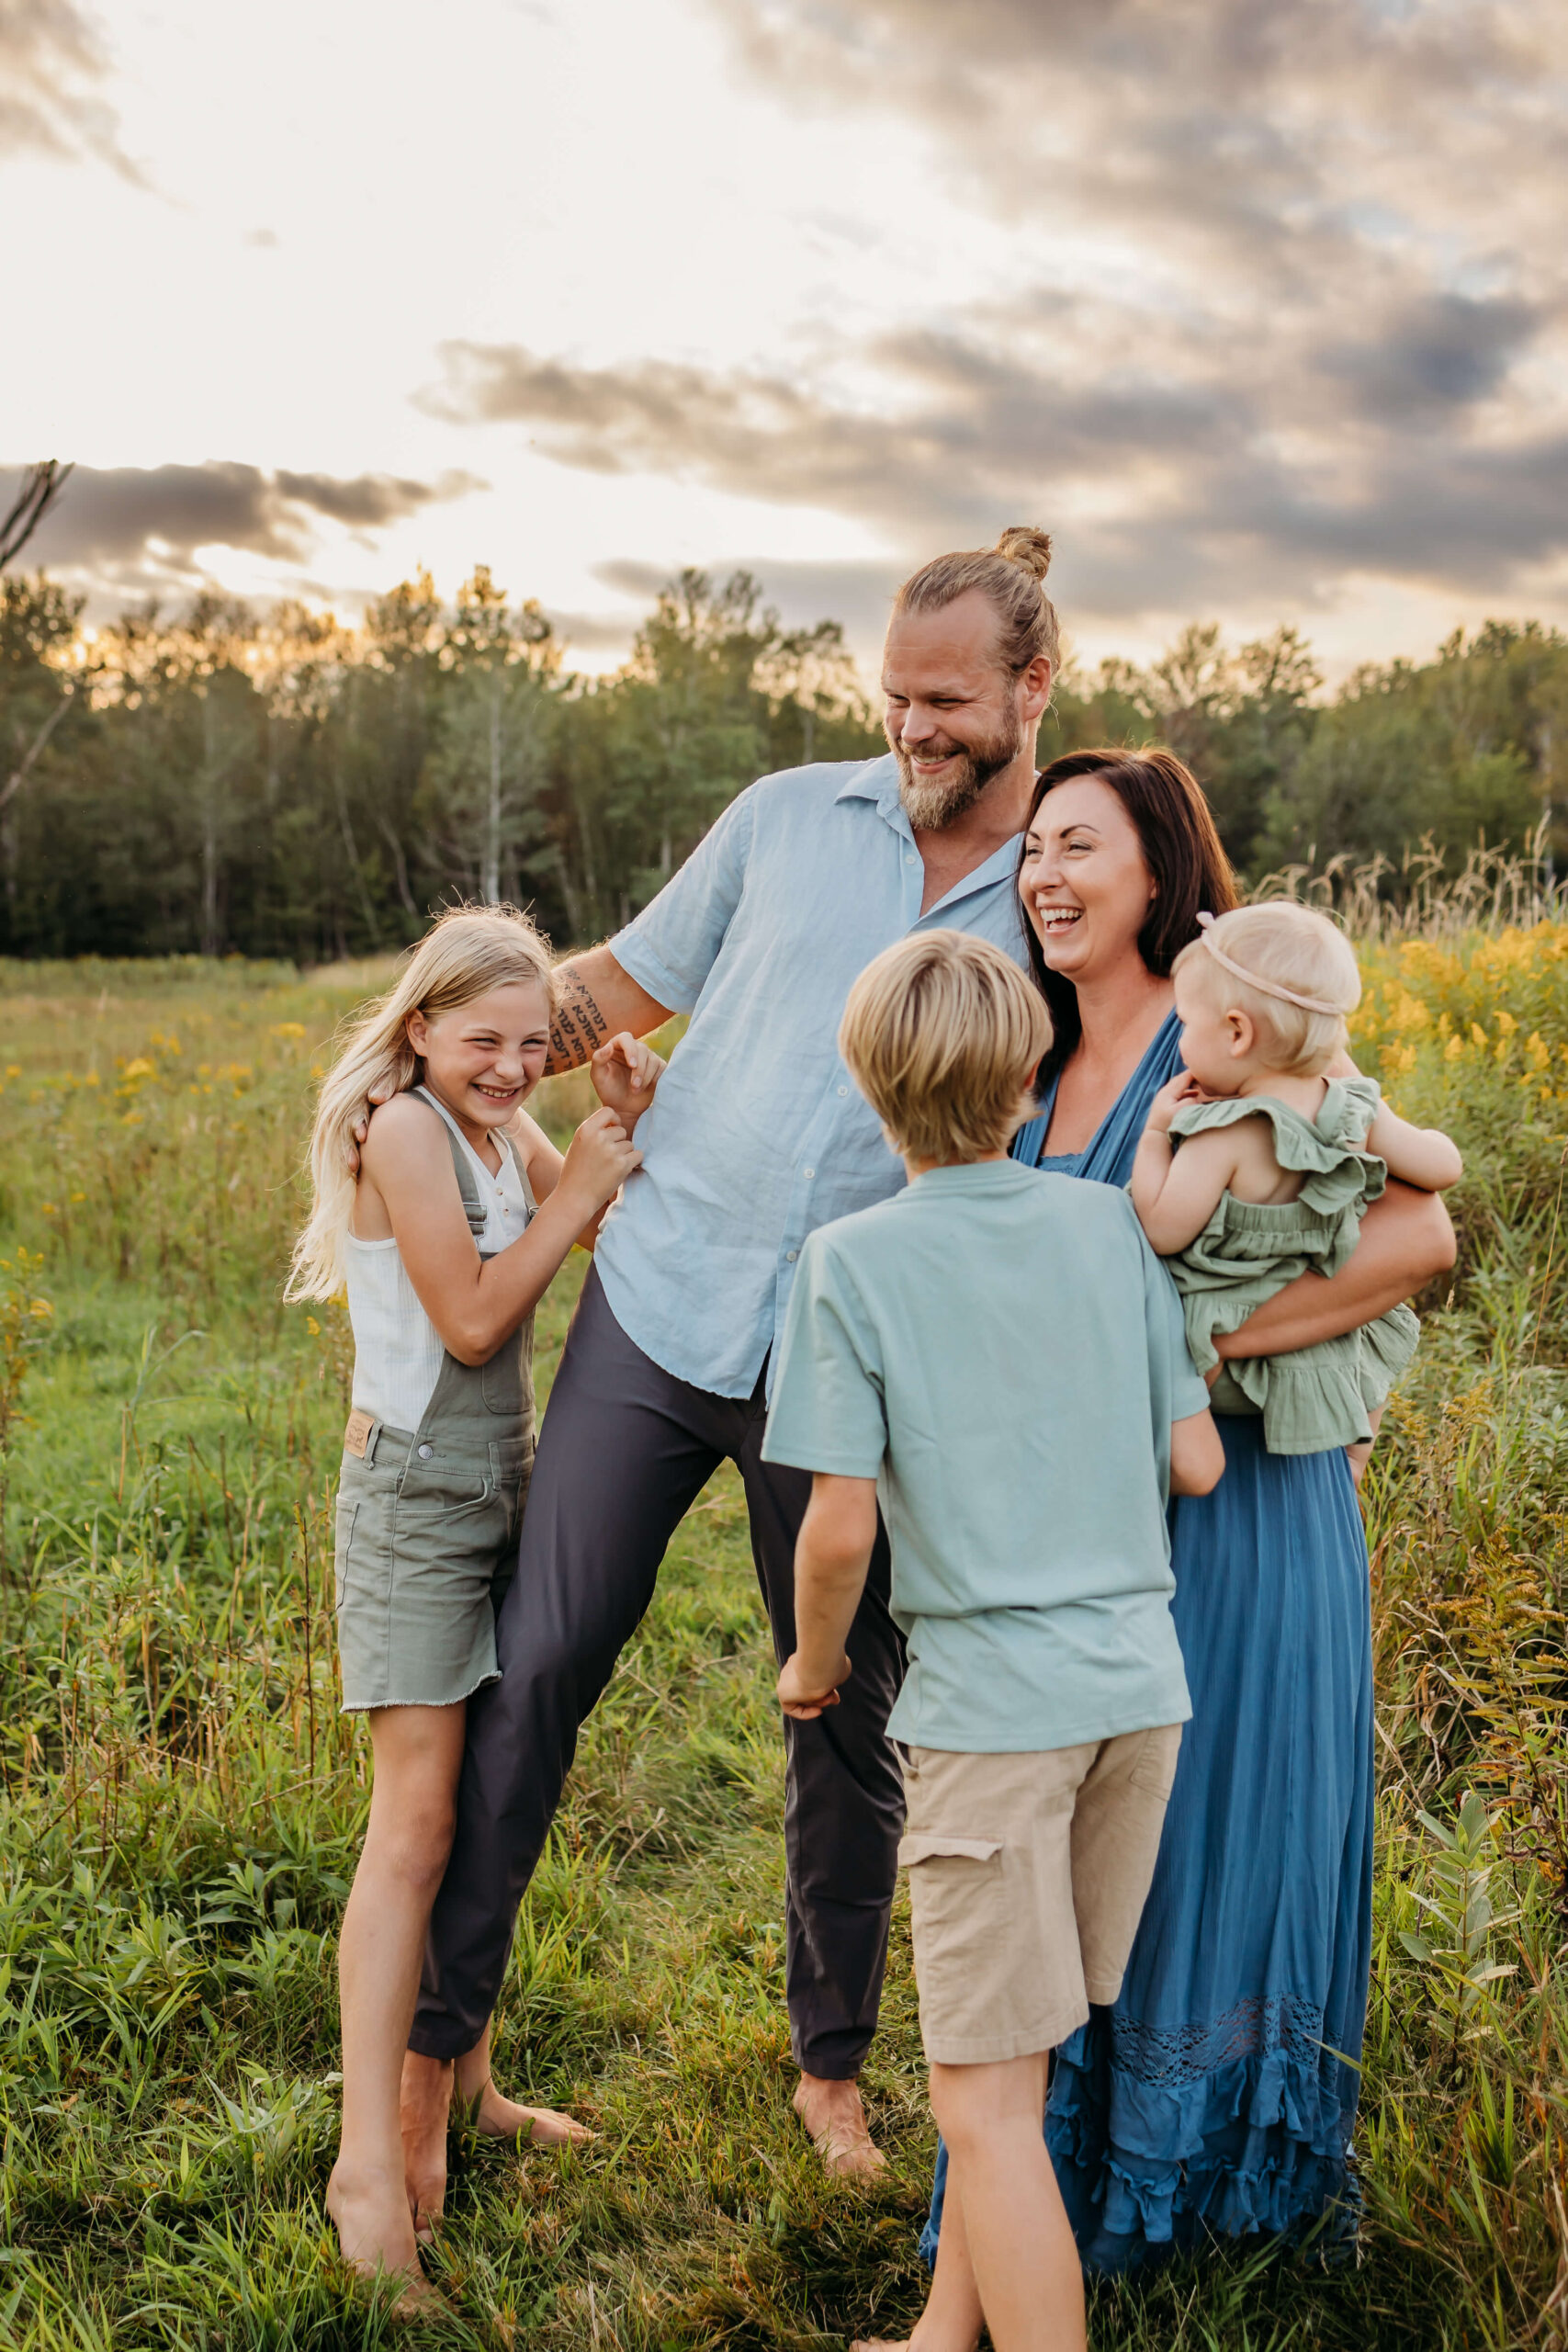 A mom and dad laugh with their two young children and a toddler on mom's hip in a field of wildflowers at sunset before some eau claire summer camps